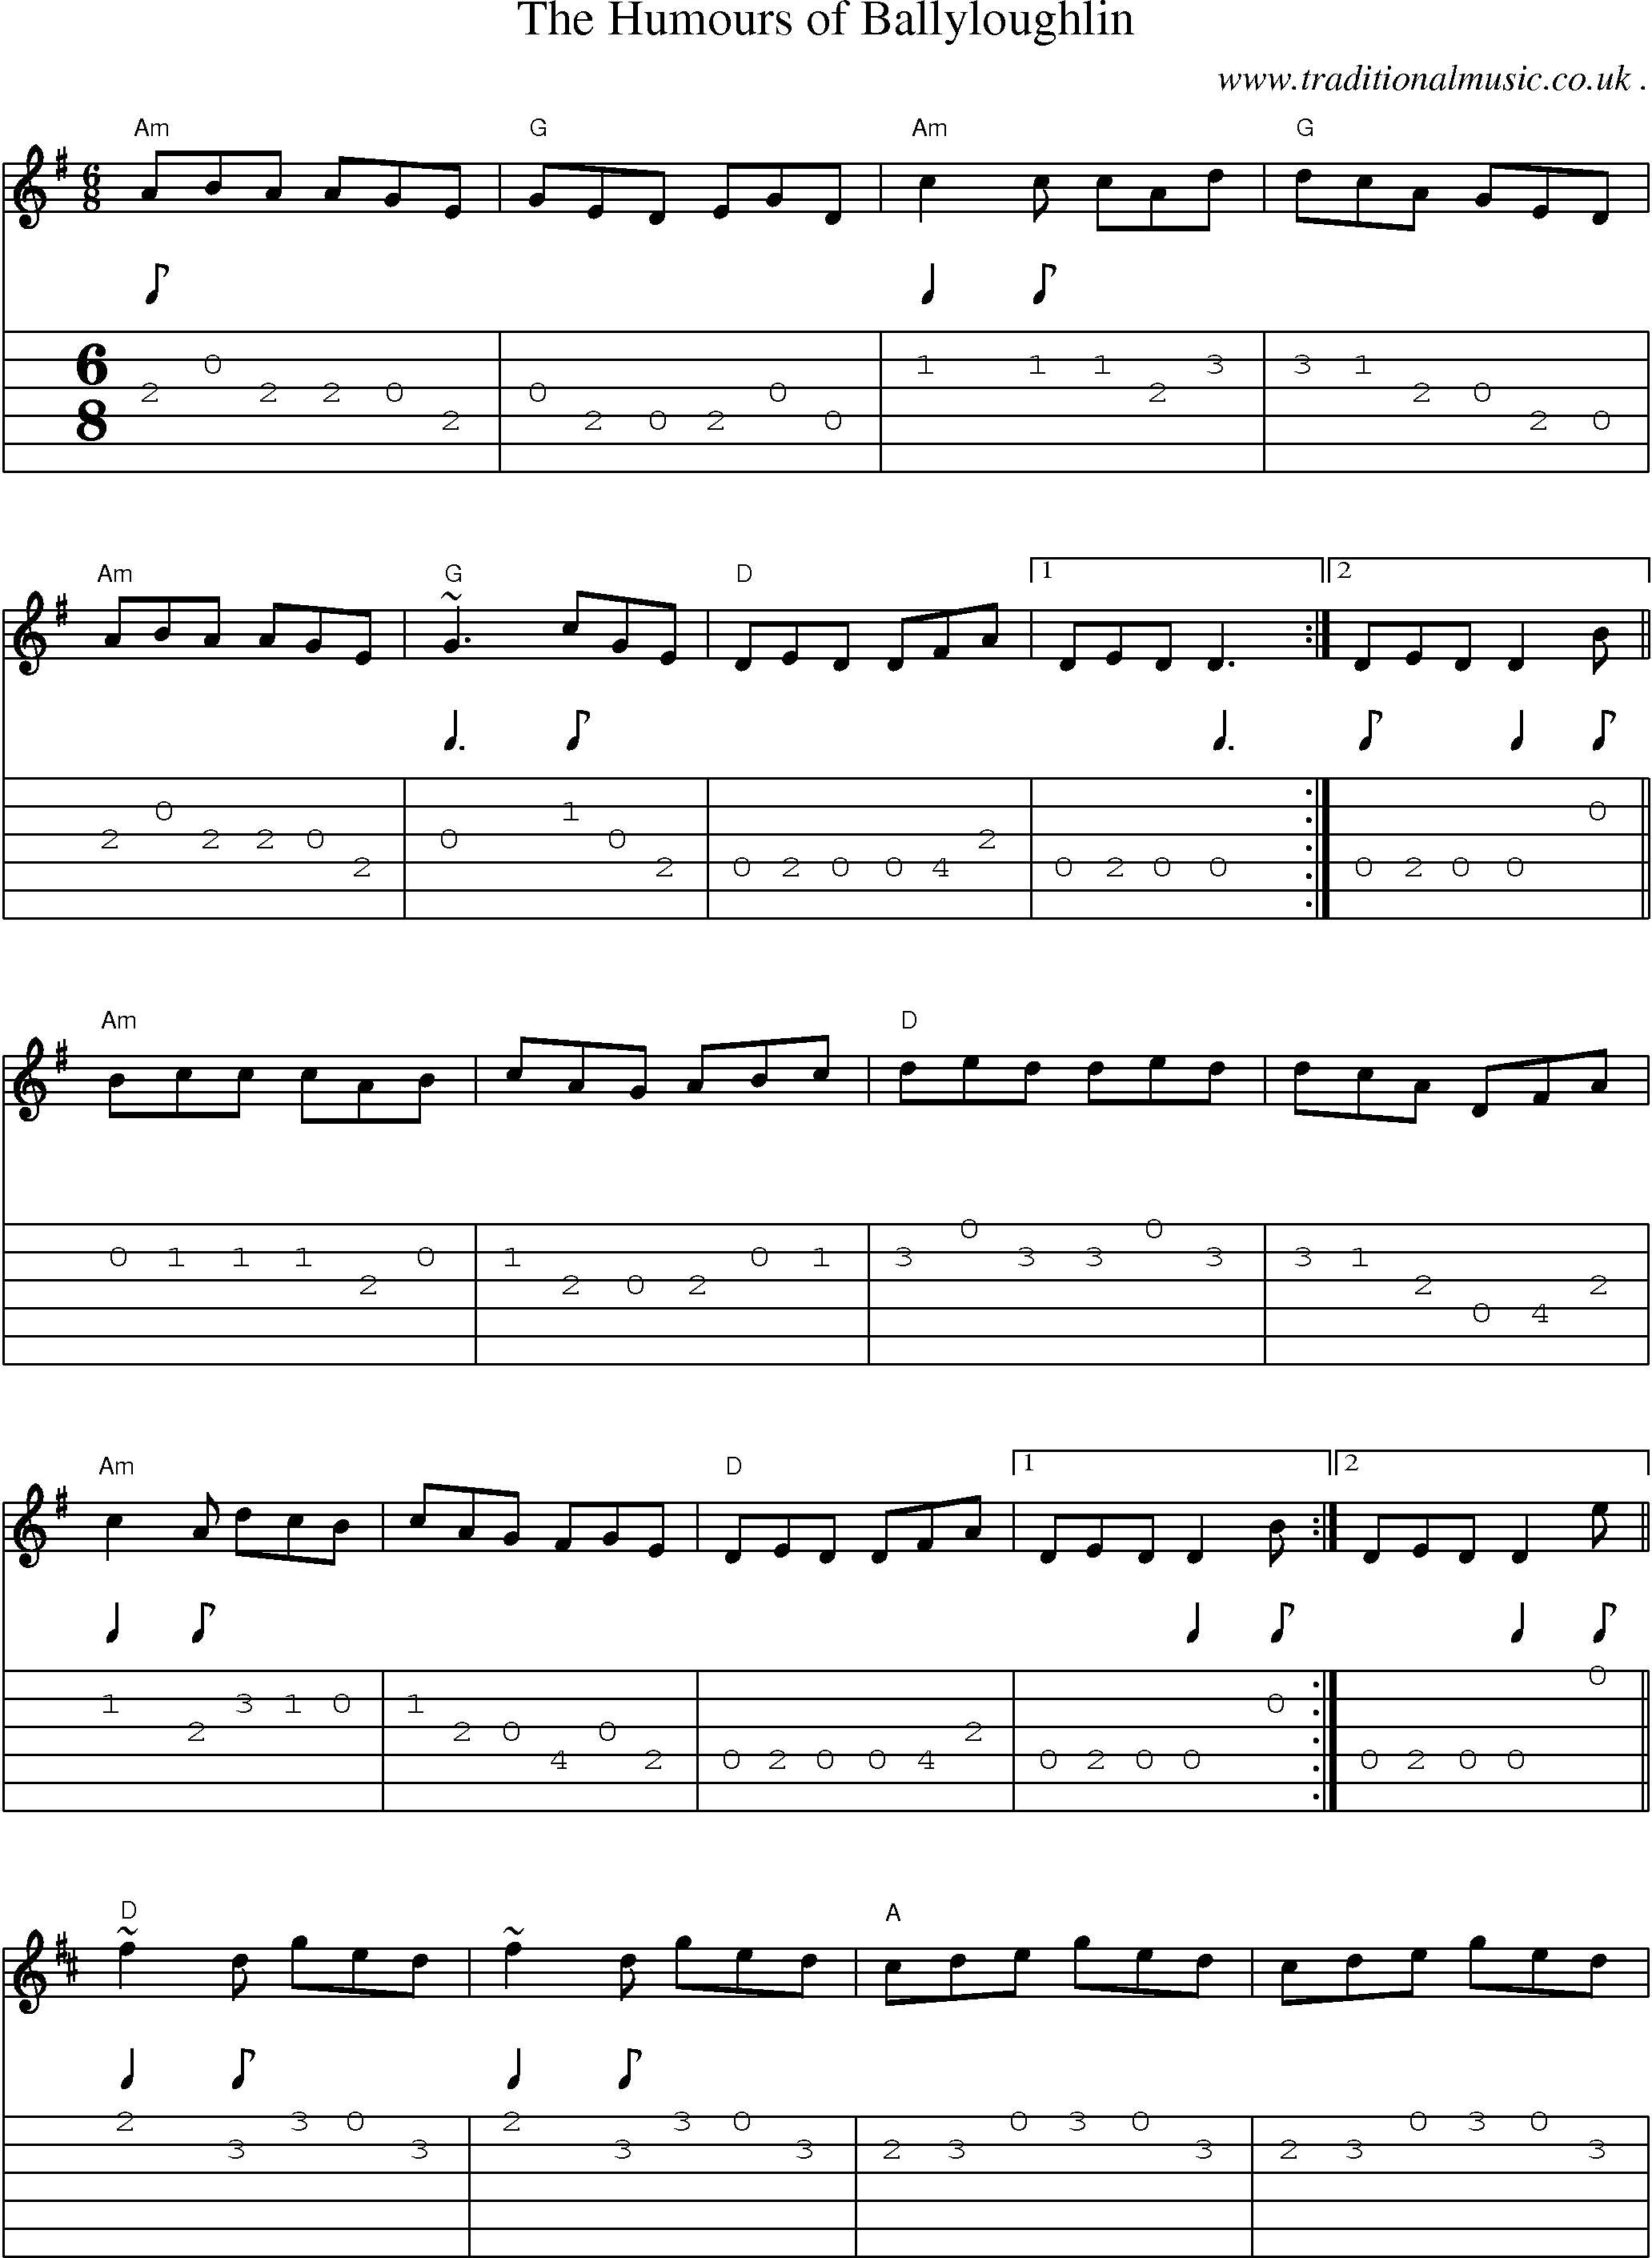 Music Score and Guitar Tabs for The Humours Of Ballyloughlin